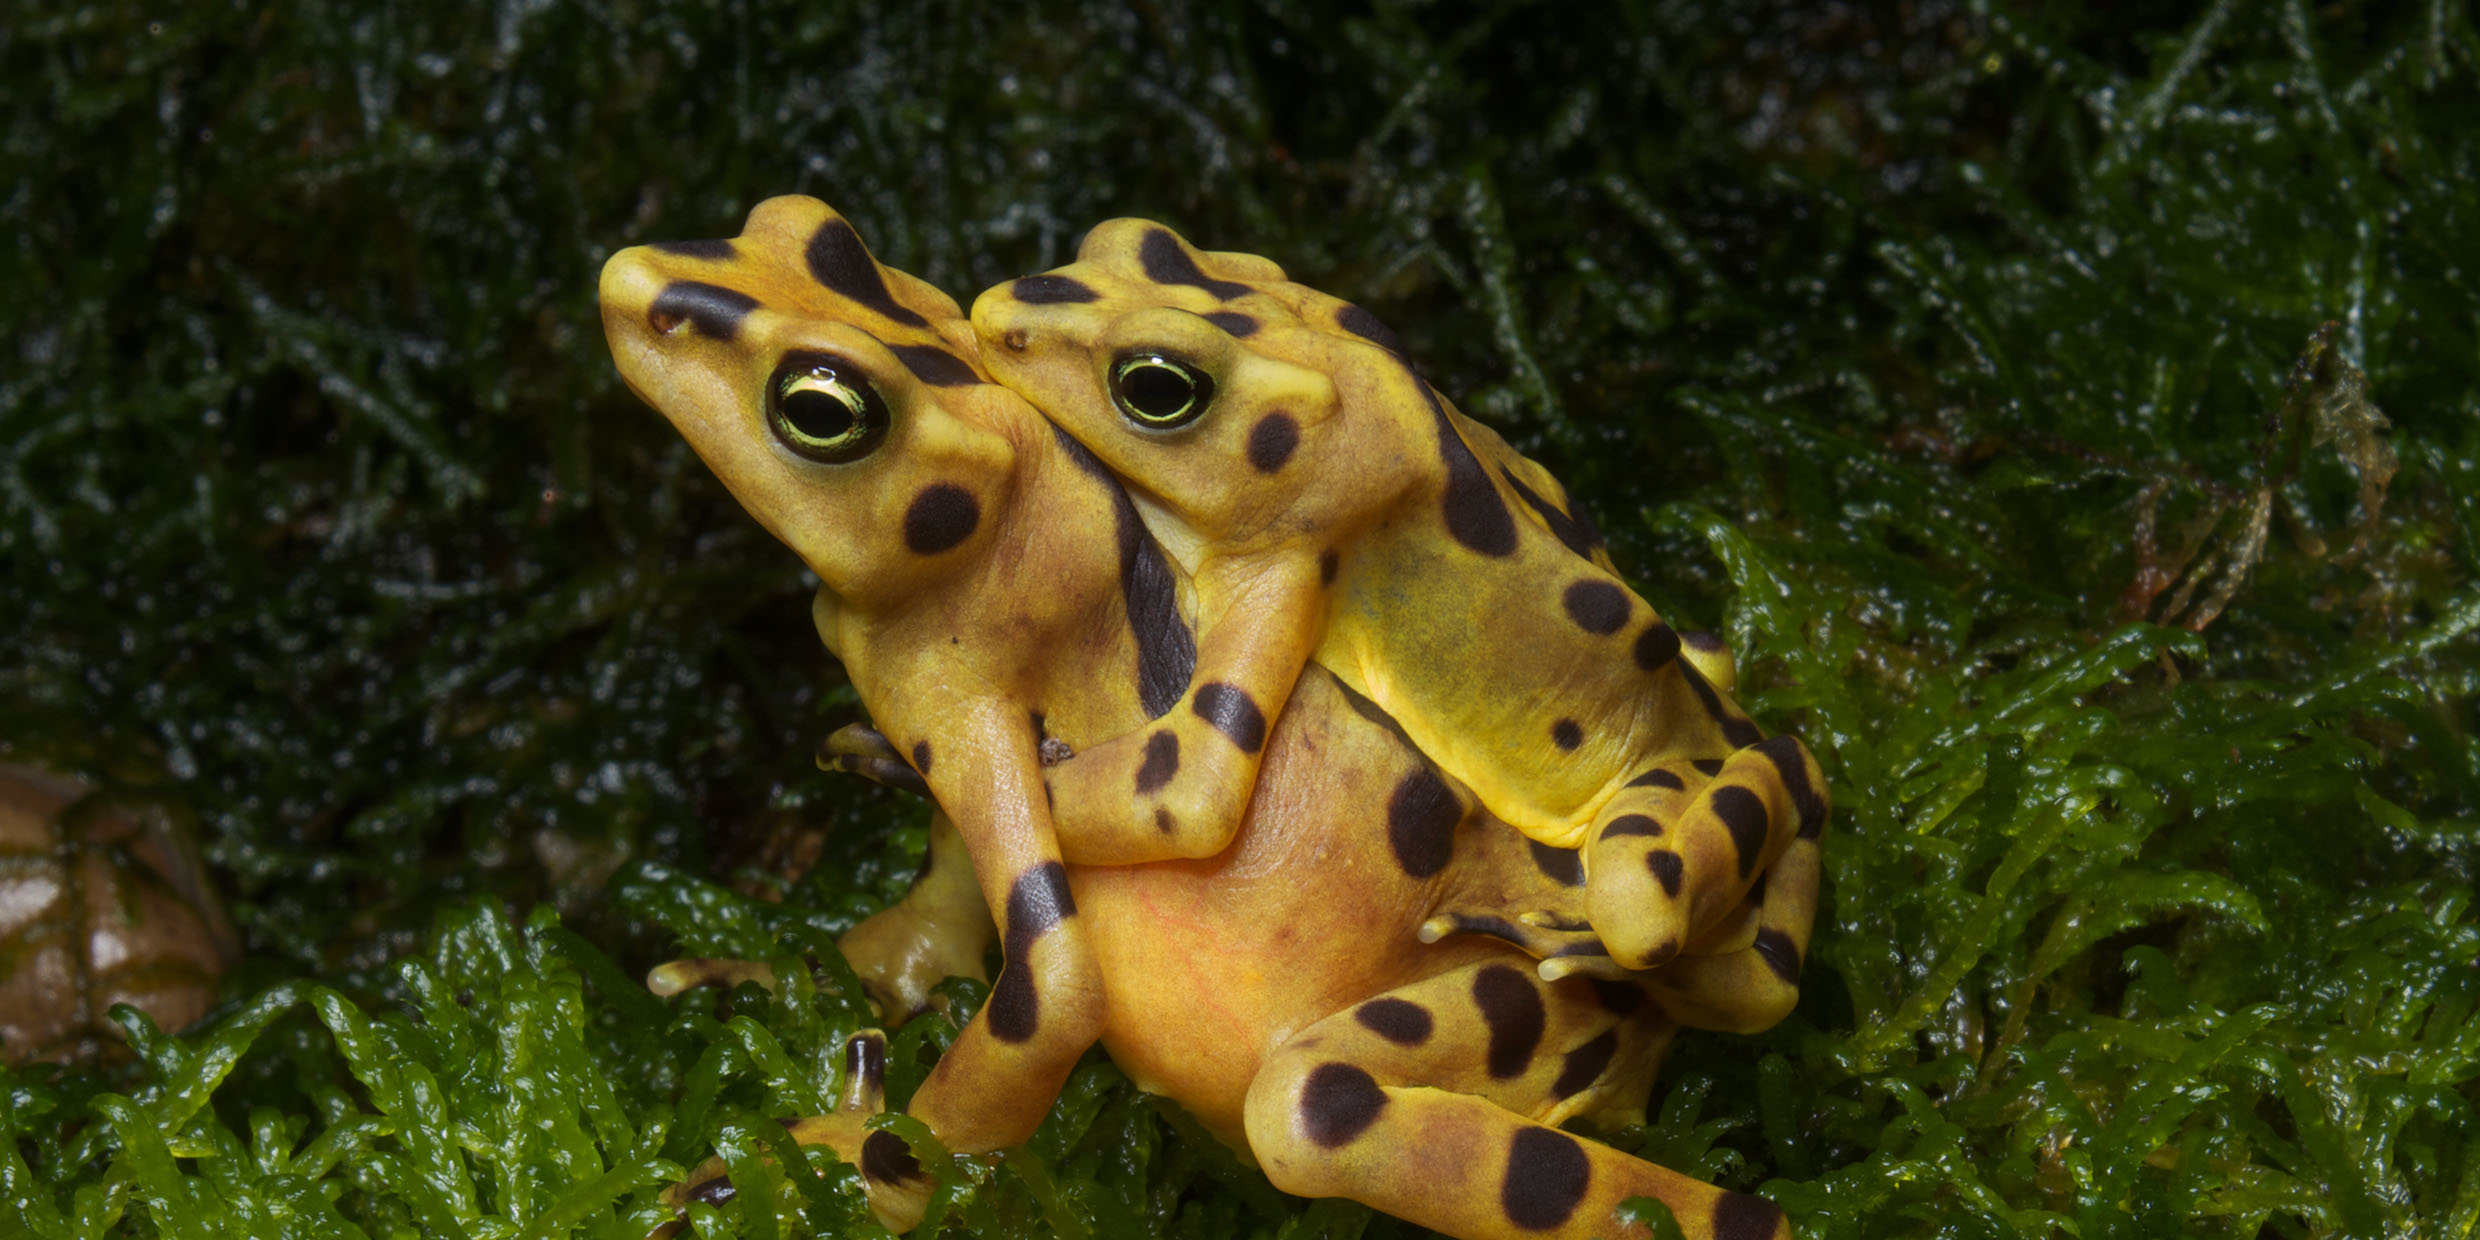 Image of two frogs mating